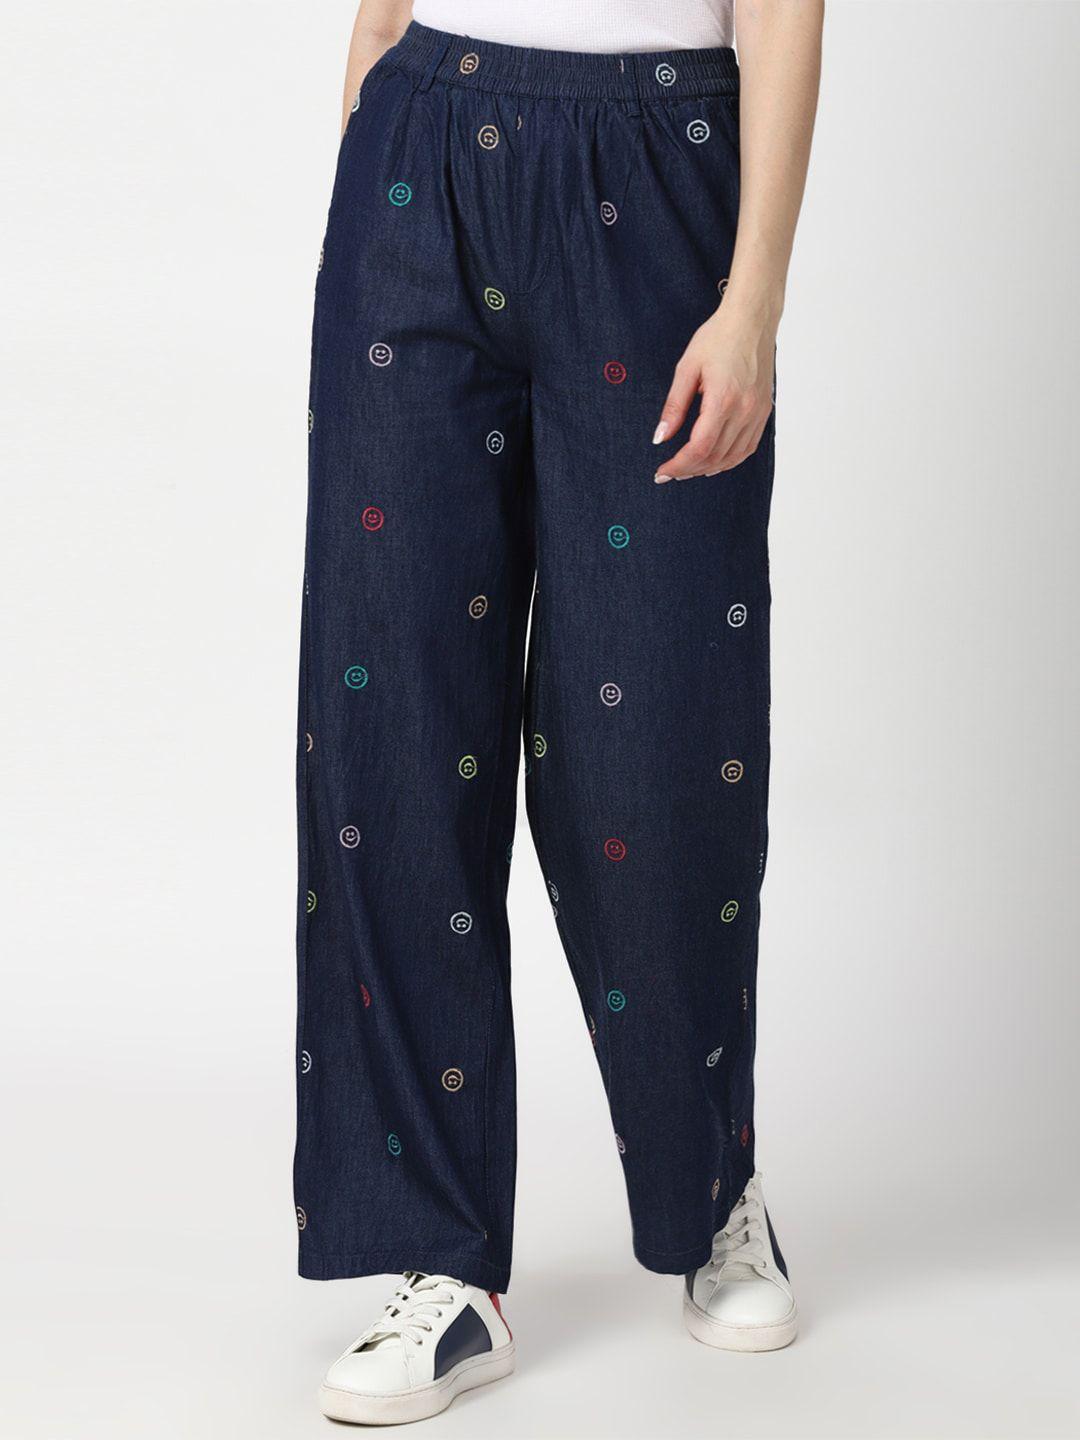 forever-21-women-navy-blue-printed-trousers